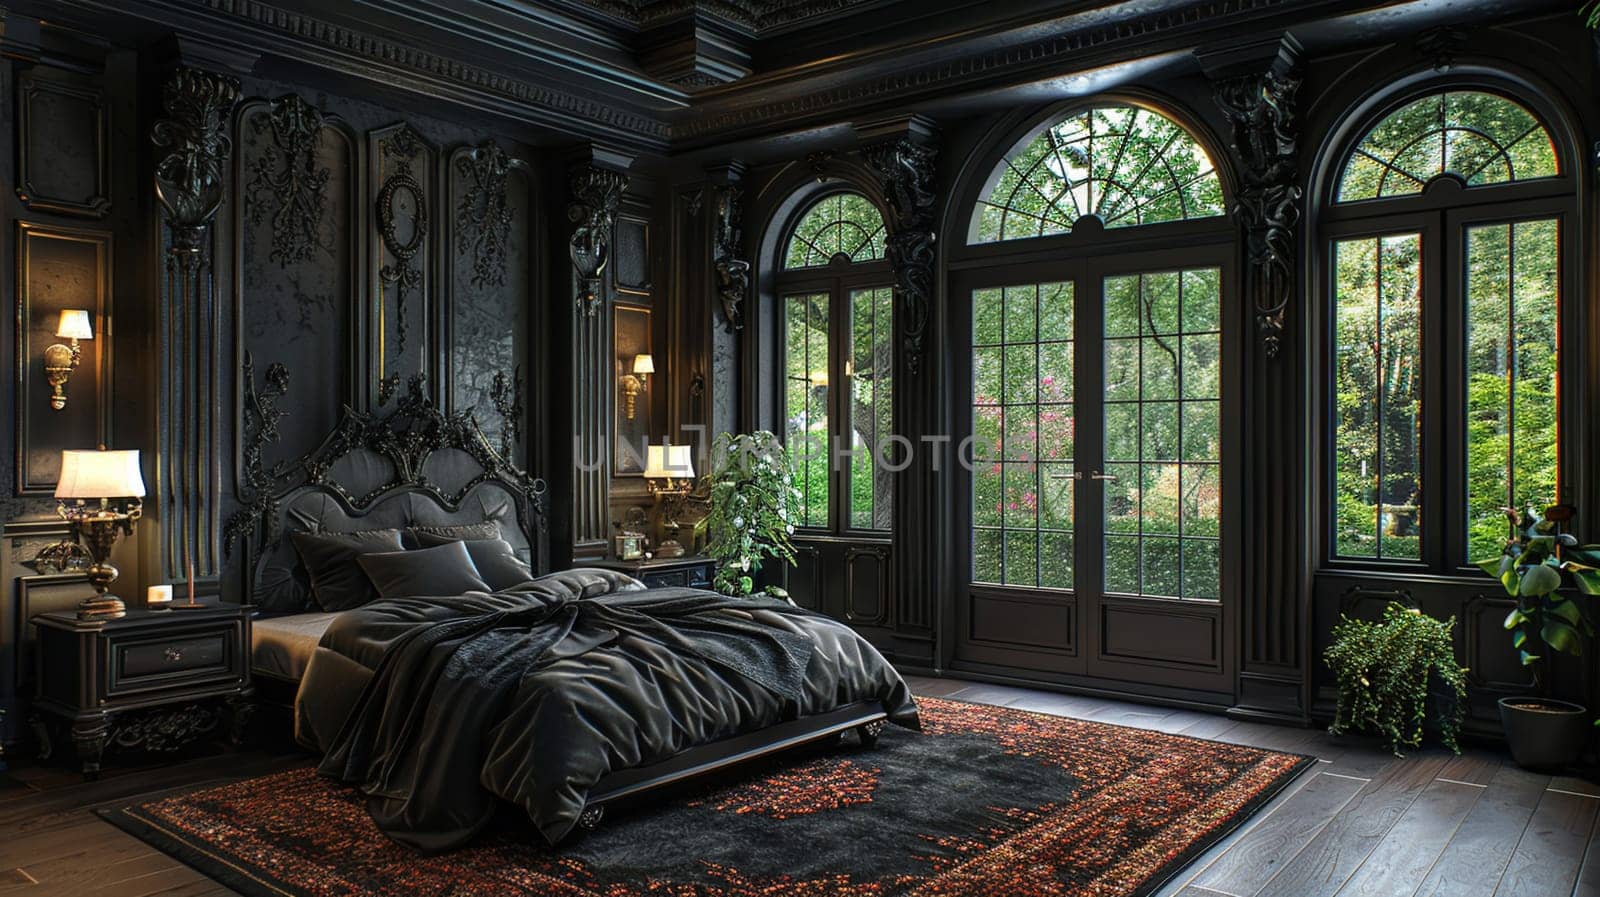 Modern Gothic bedroom with dark colors and dramatic decor3D render.